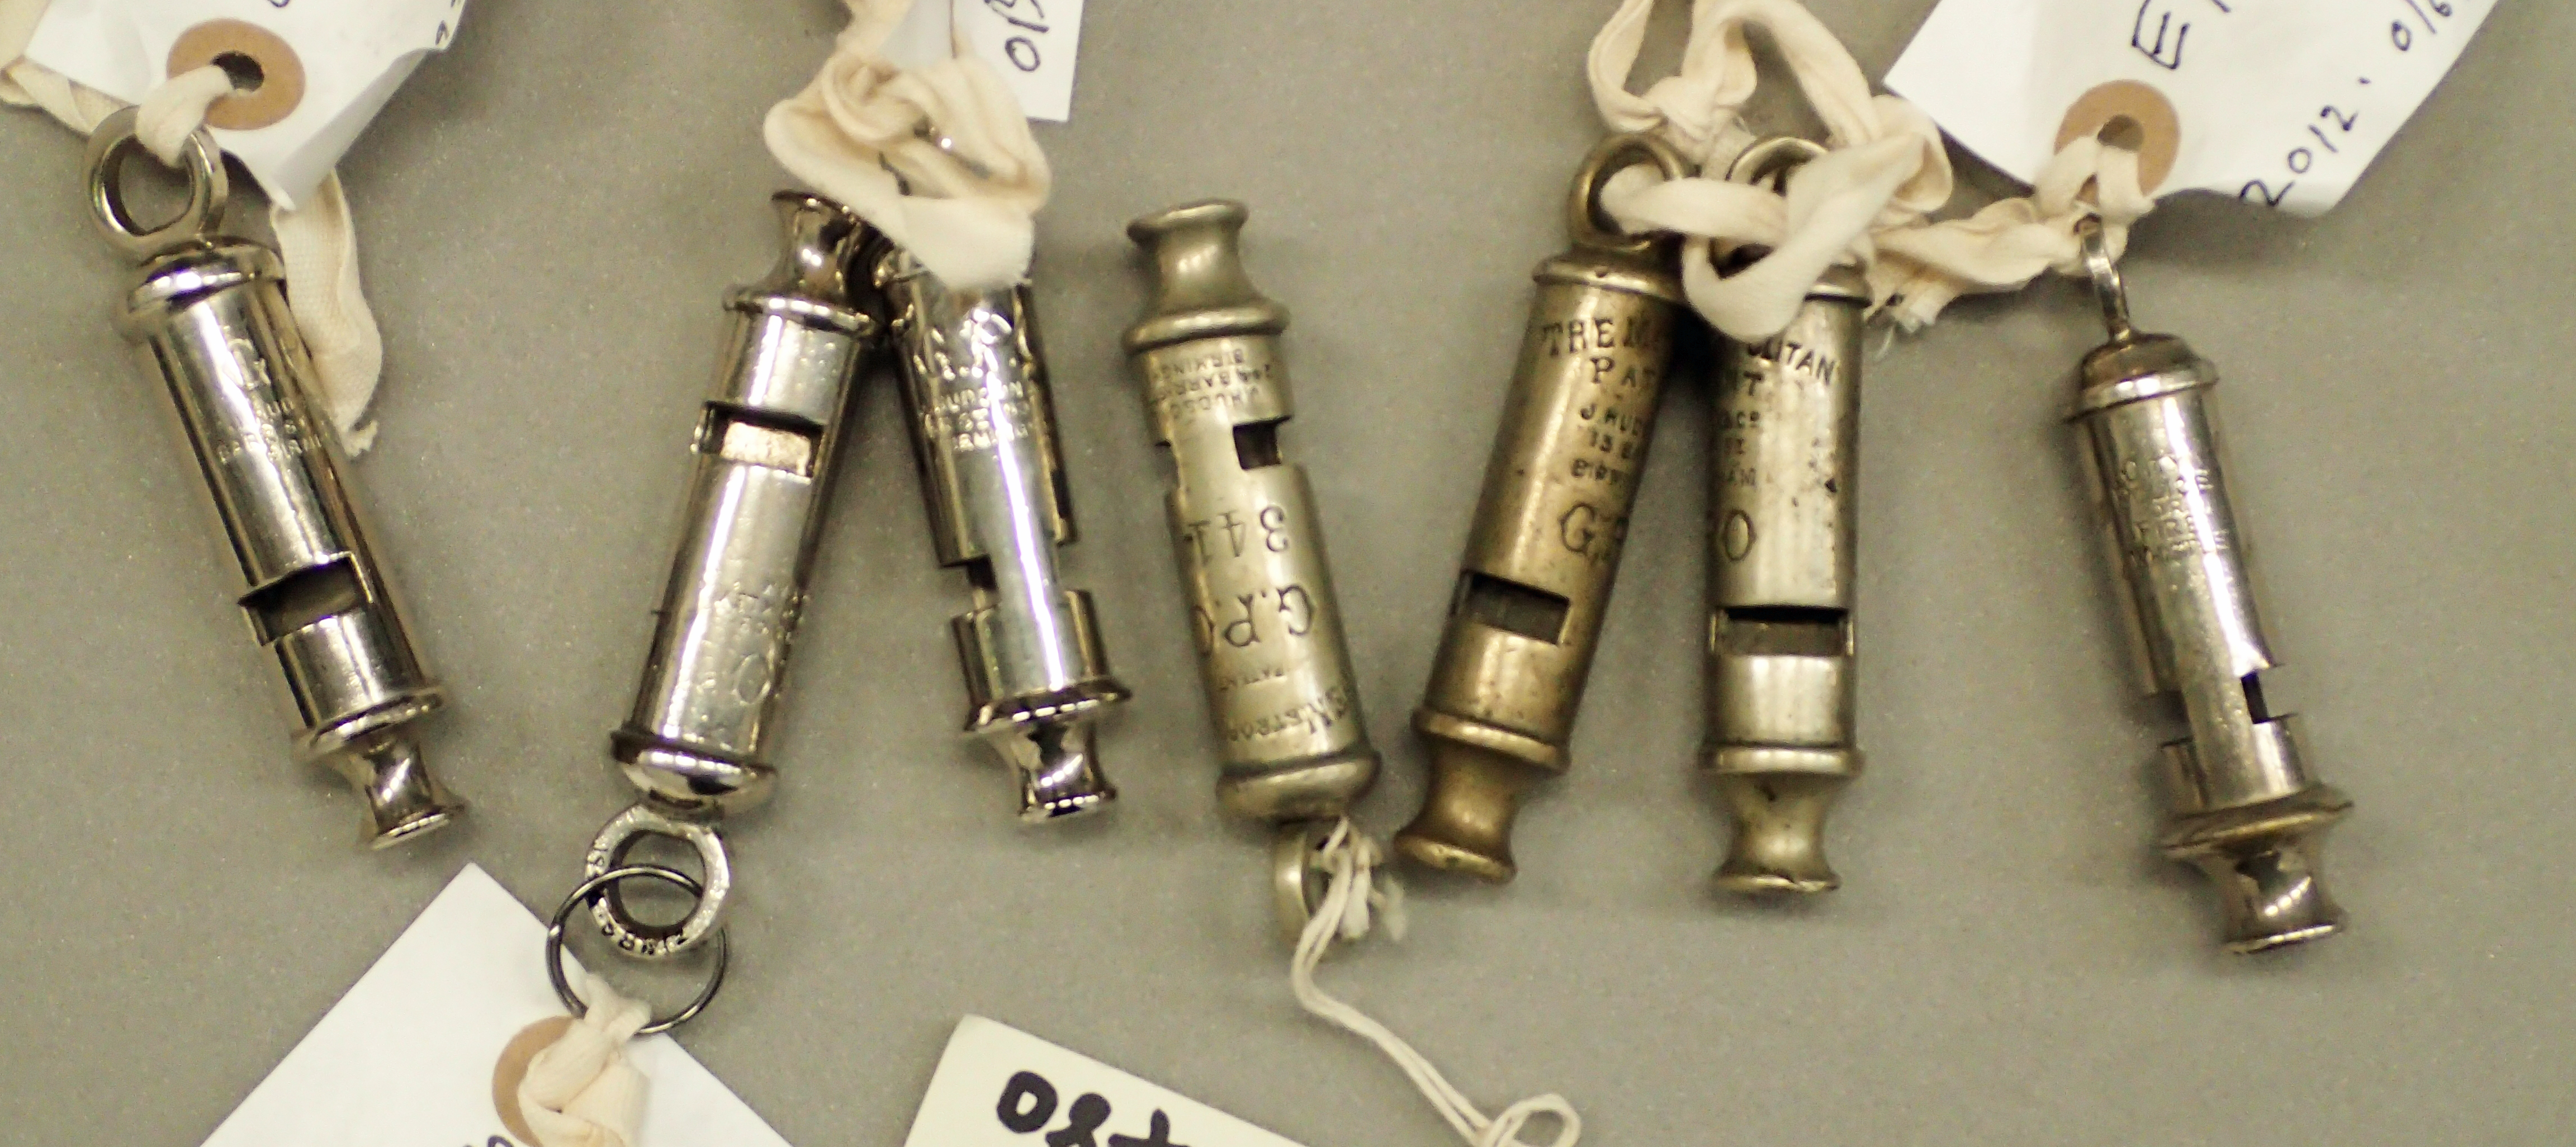 Part of the collection of Postmen’s whistles in The Postal Museum collection